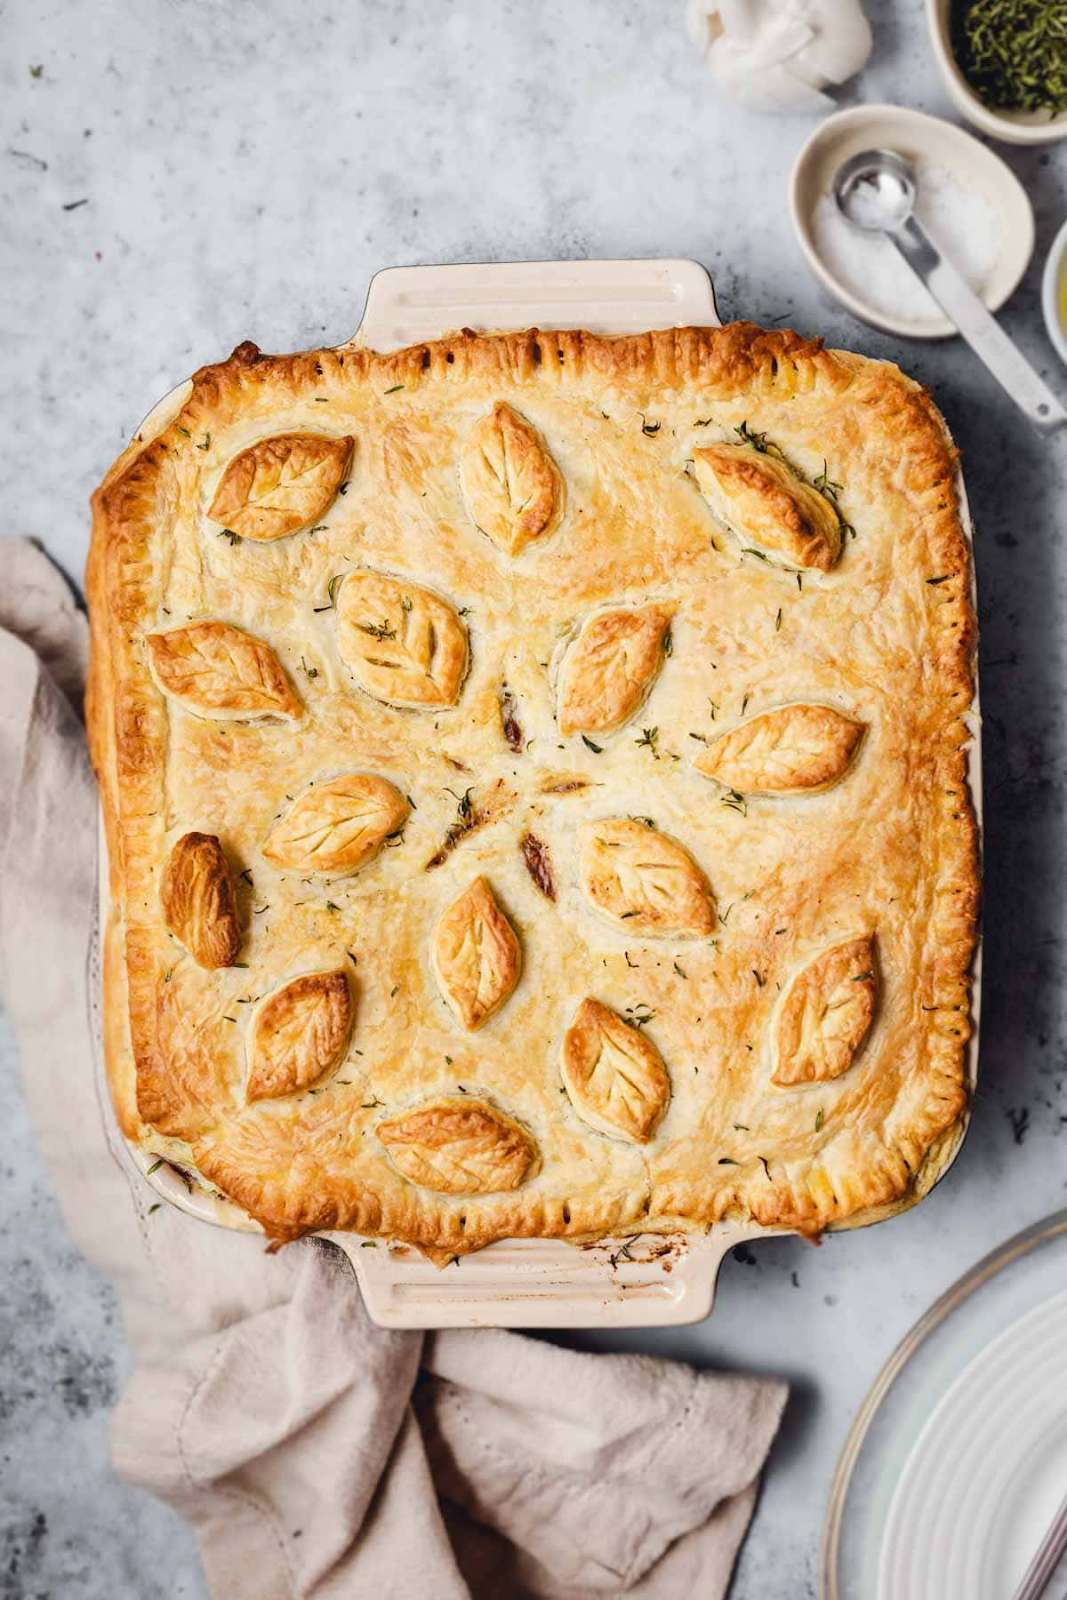 Vegan pot pie with flaky pastry crust and leaves designed on the crust.